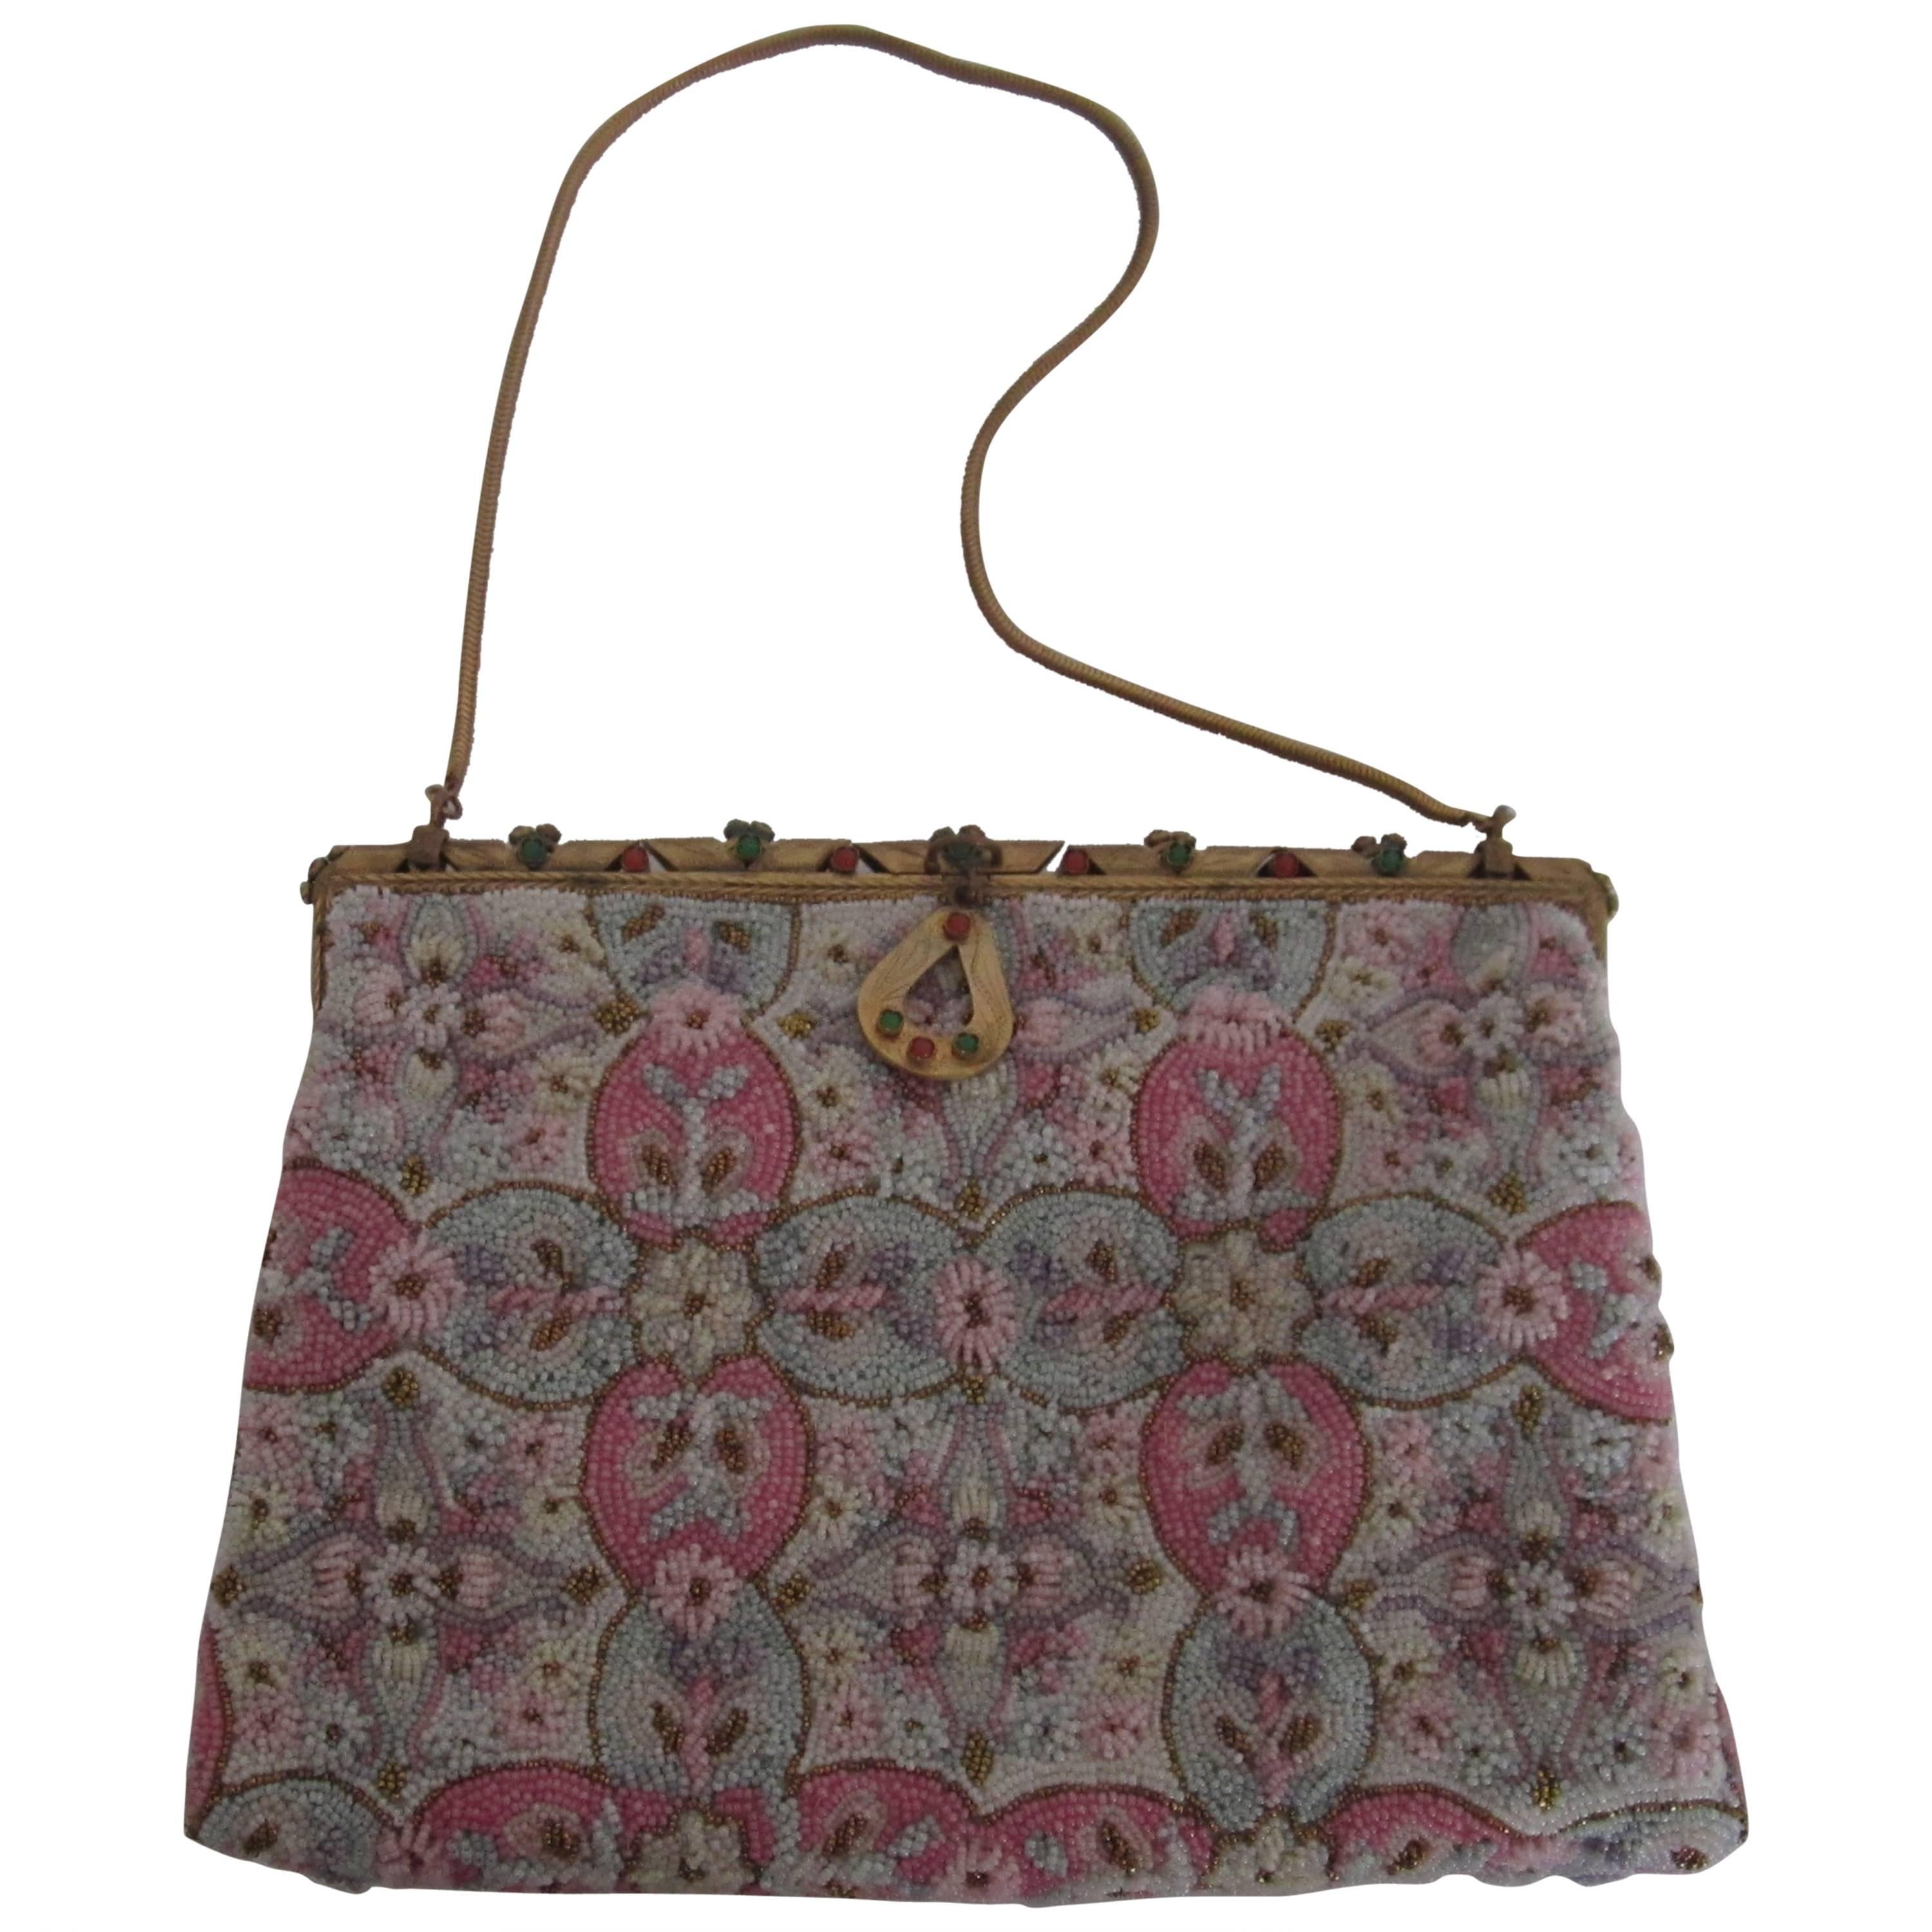 Exquisite Vintage French Beaded Bag from Paris, 1940s